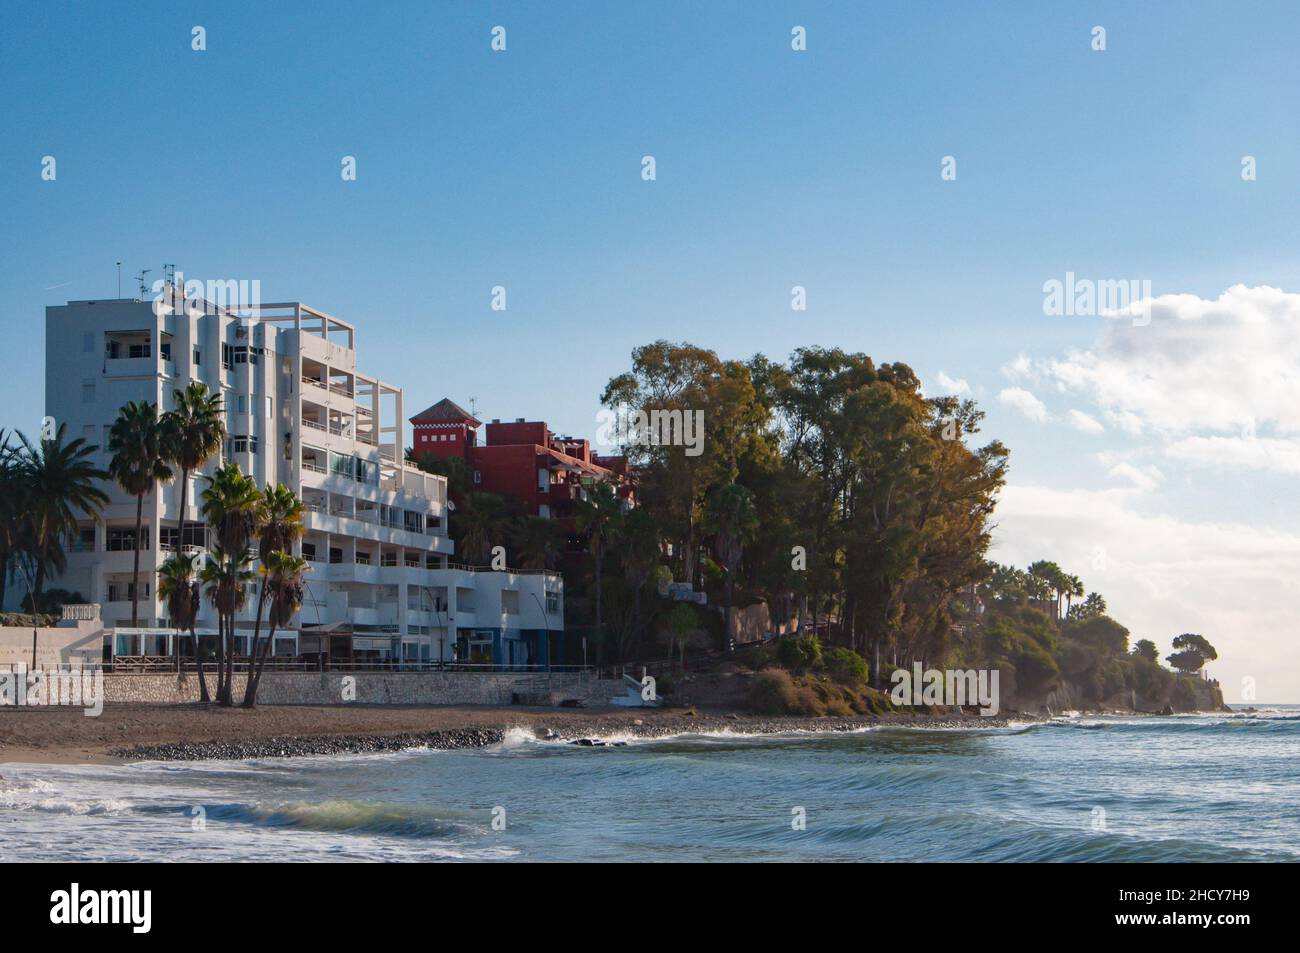 View of sandy beach by the sea or ocean with palm trees under blue sky. Stock Photo